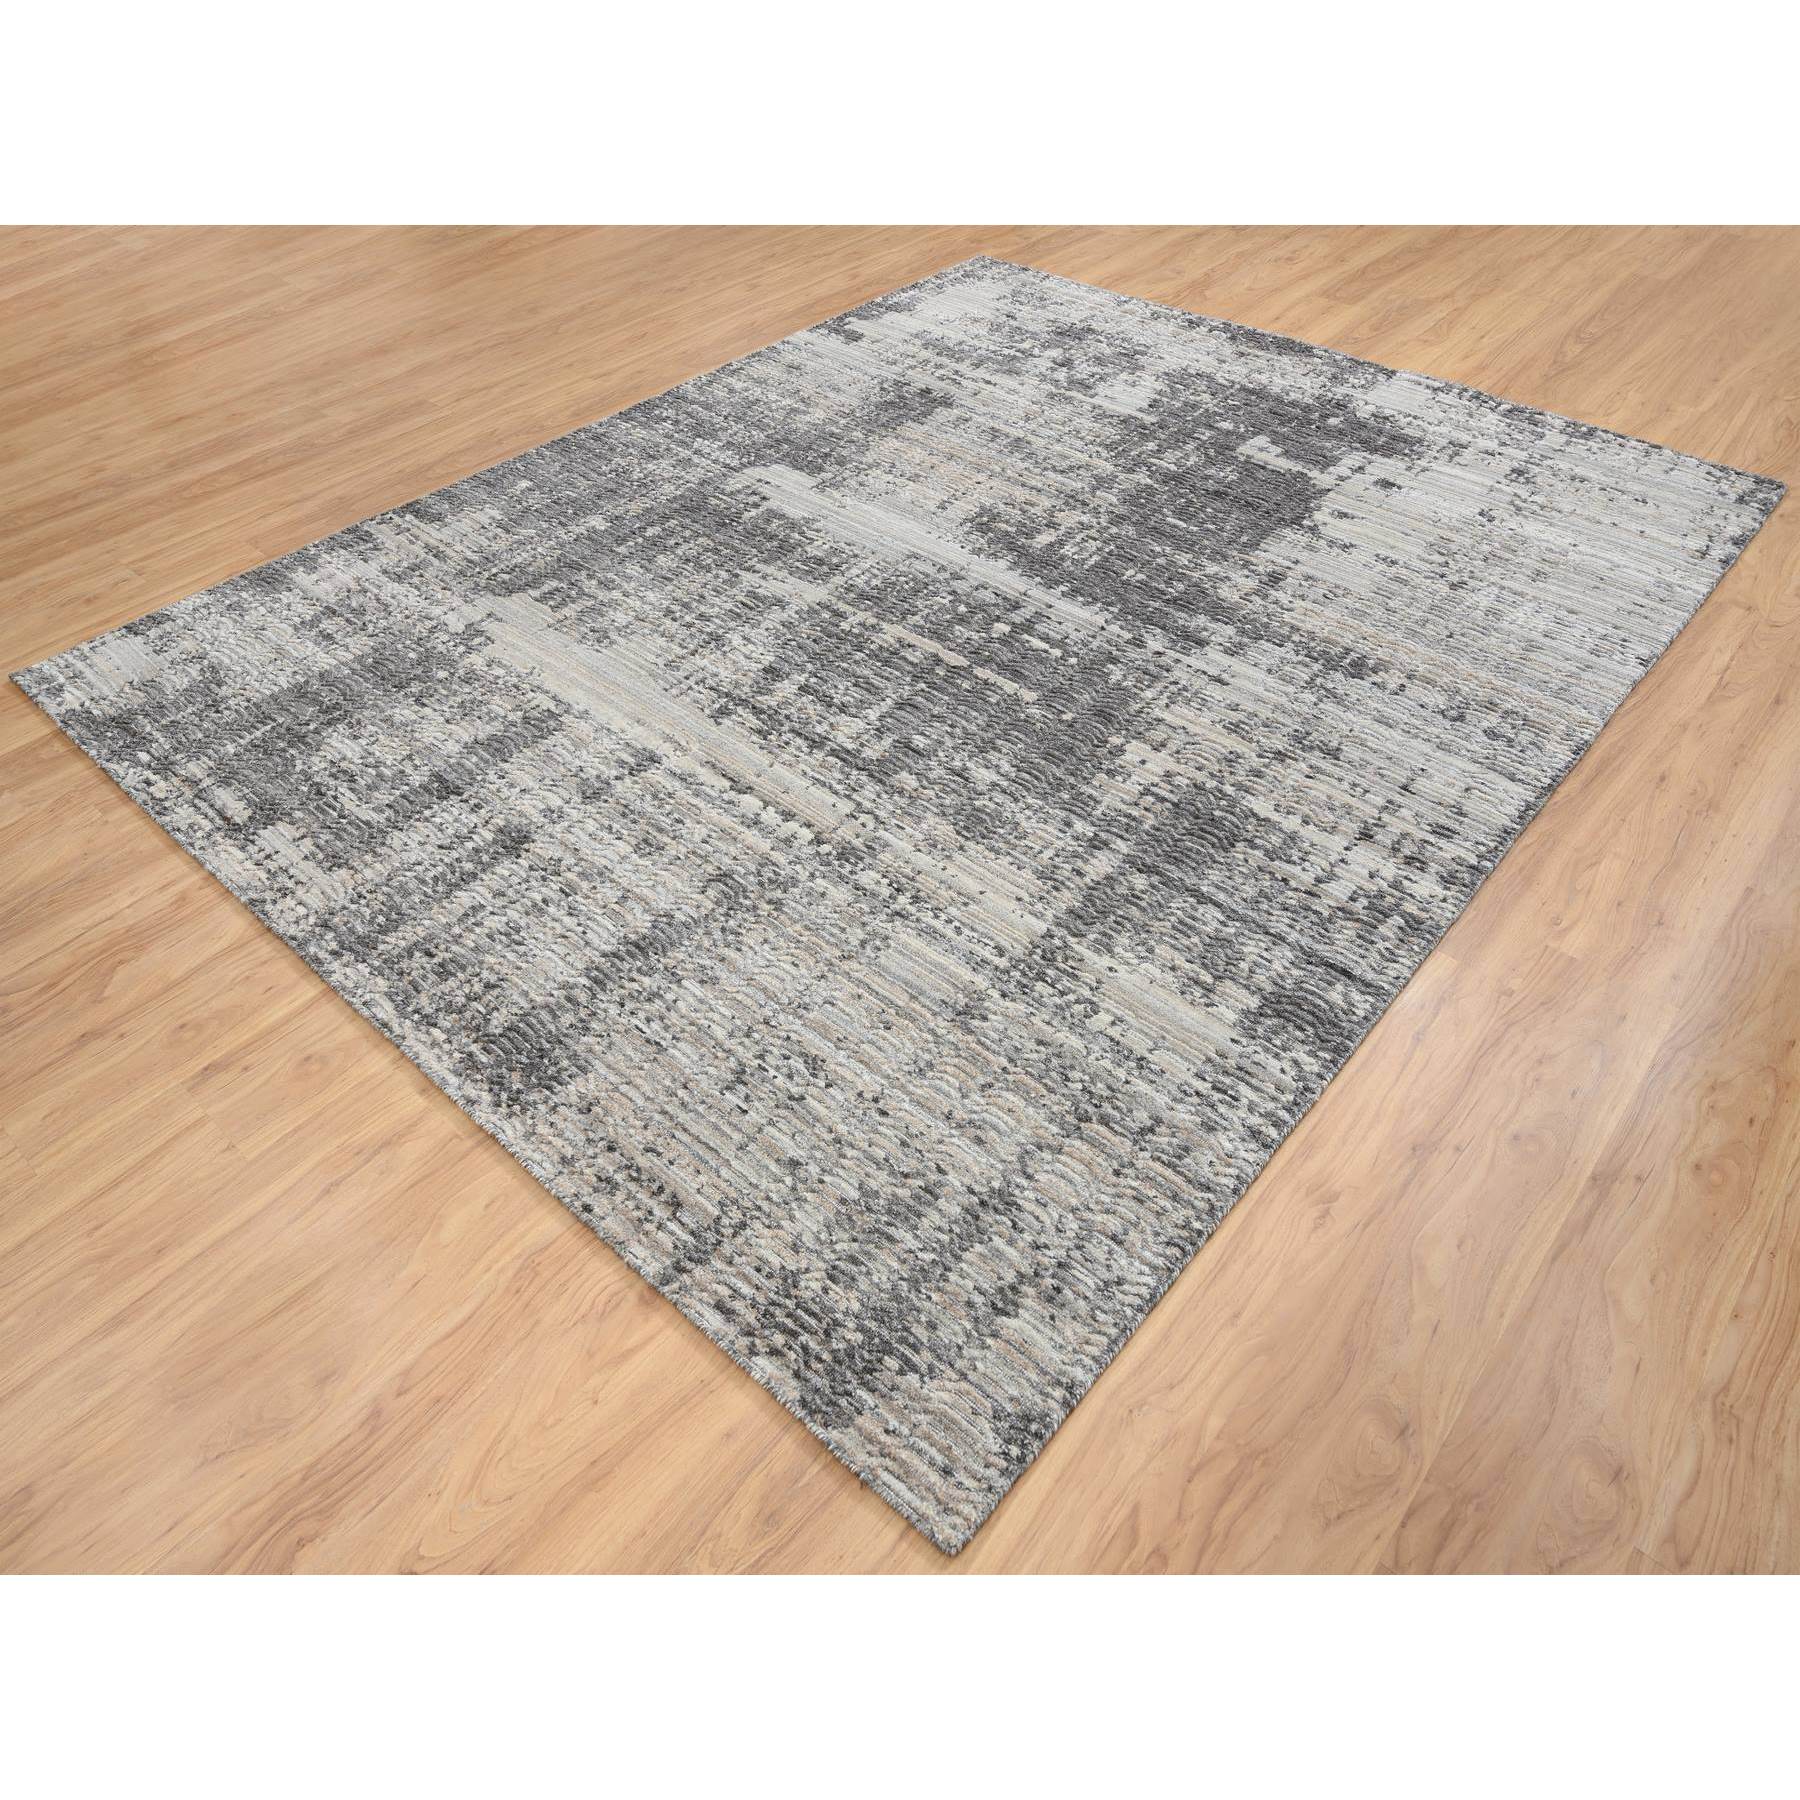 8'1"x10' Gray Variegated Texture Modern Abstract Design, Natural Wool, Hand Loomed Oriental Rug 